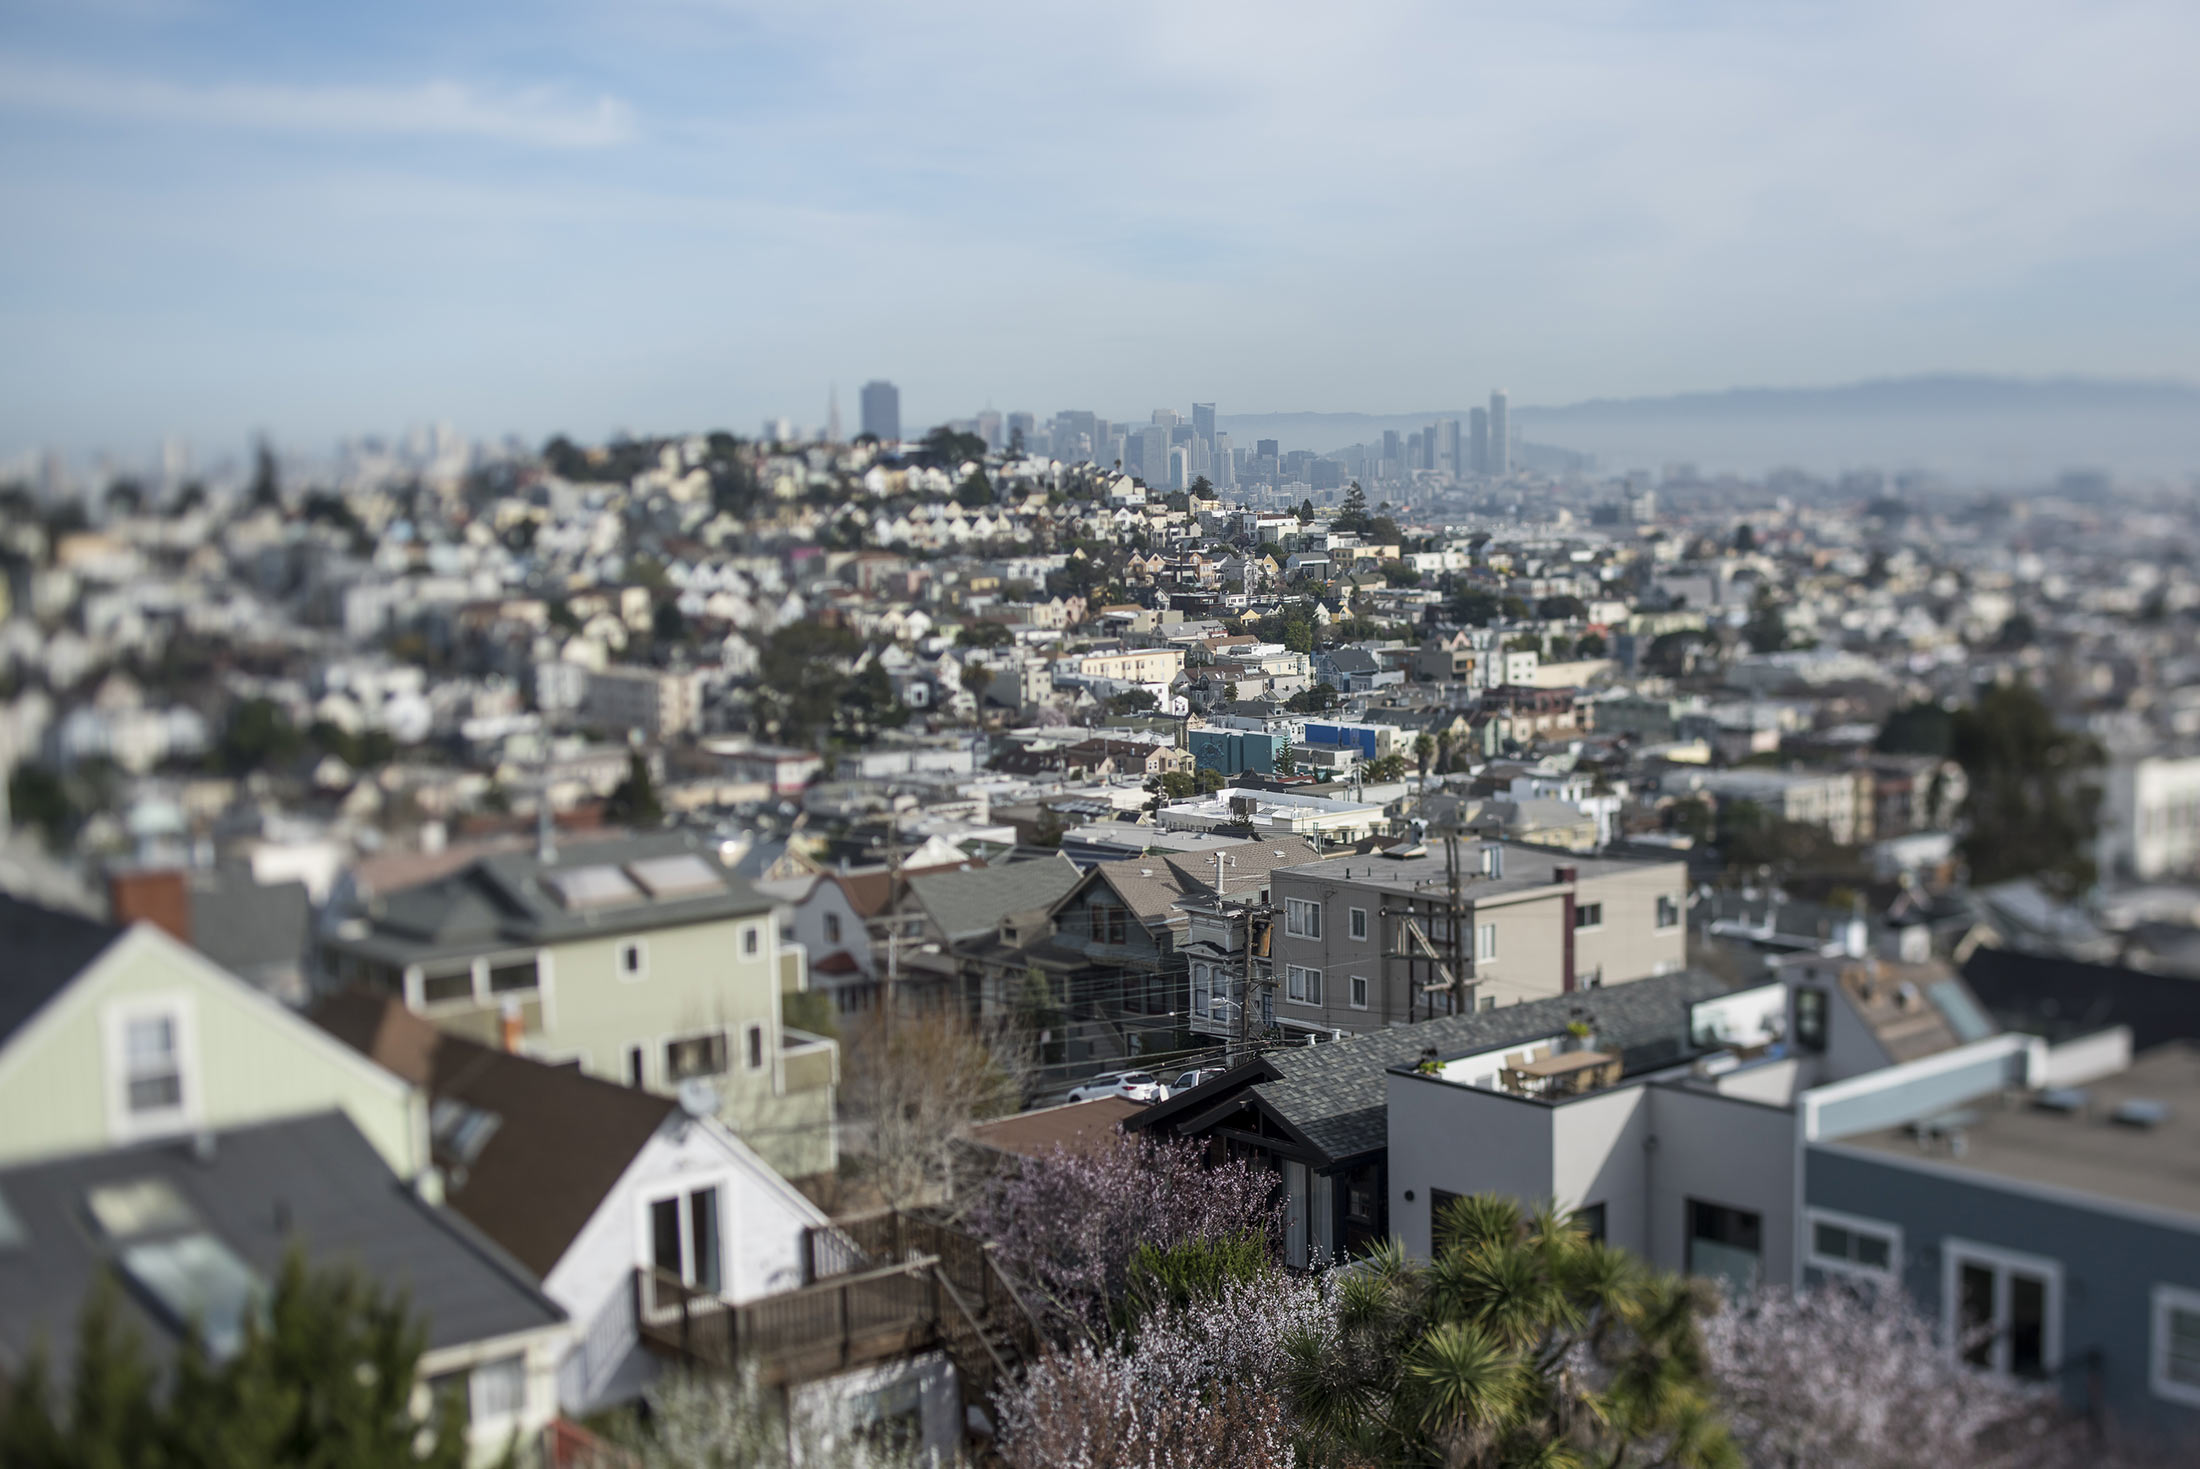 Priciest San Francisco Home Sales Face Higher Tax Under Proposal